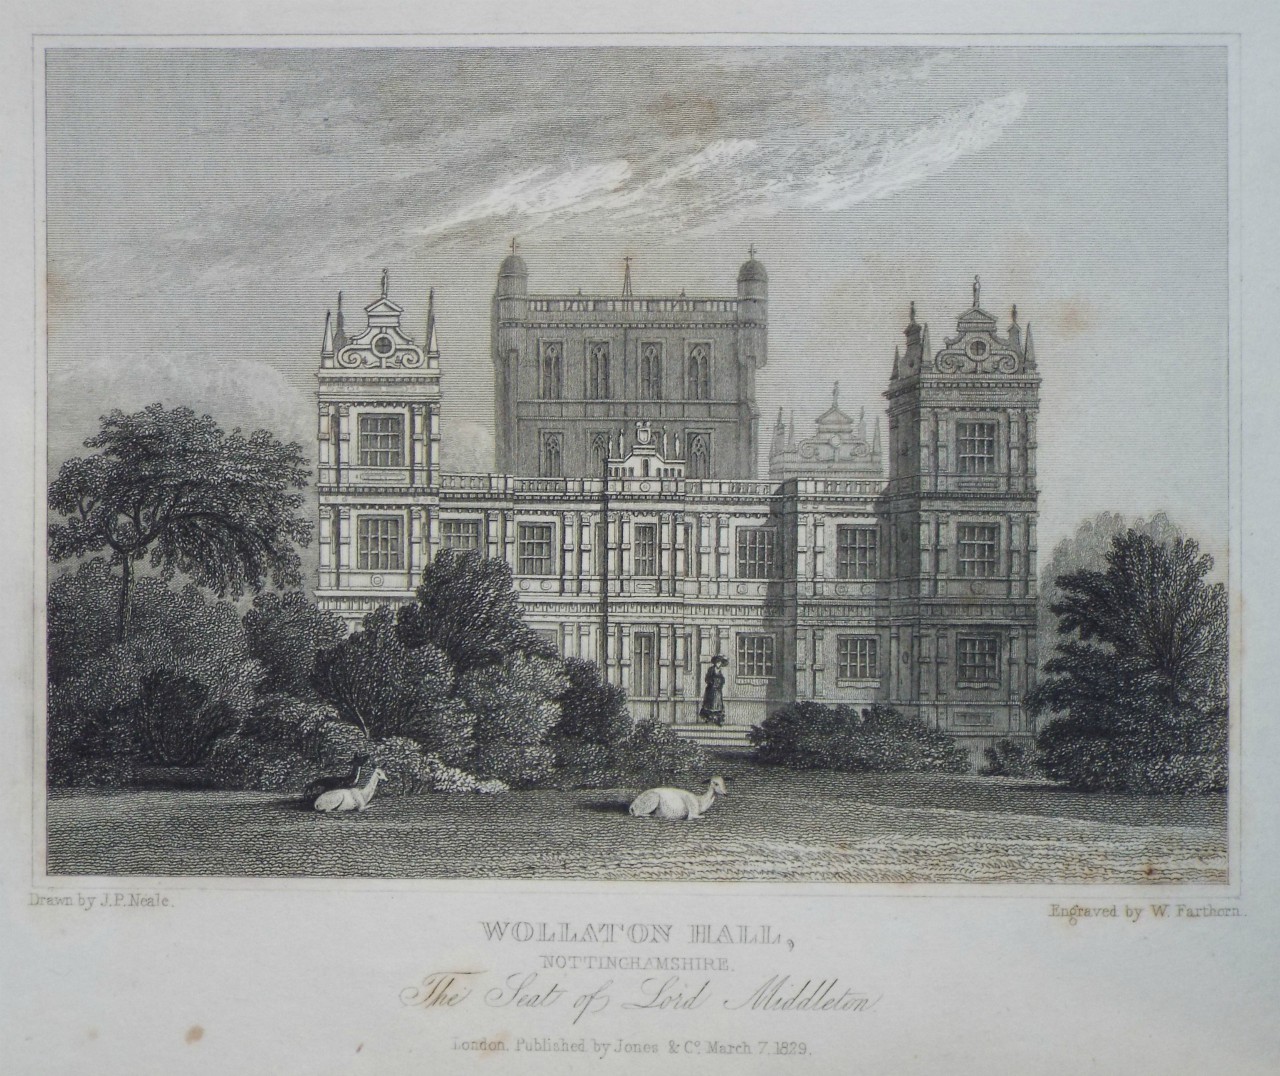 Print - Wollaton Hall, Nottinghamshire. The Seat of Lord Middleton. - Farthorn